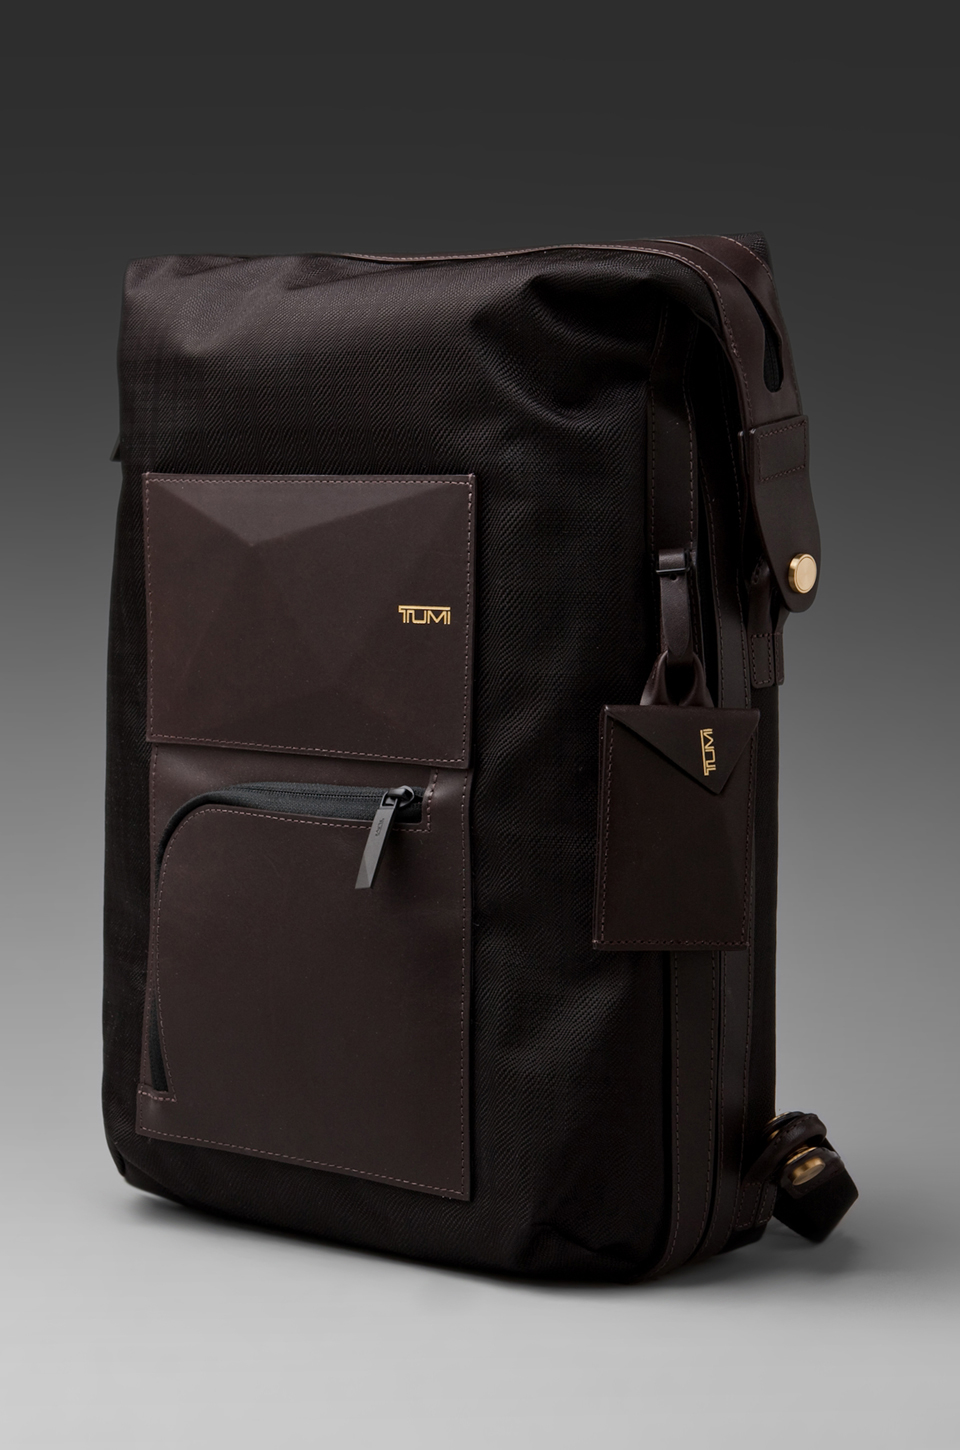 Tumi Dror Backpack in Onyx (Black) for Men - Lyst